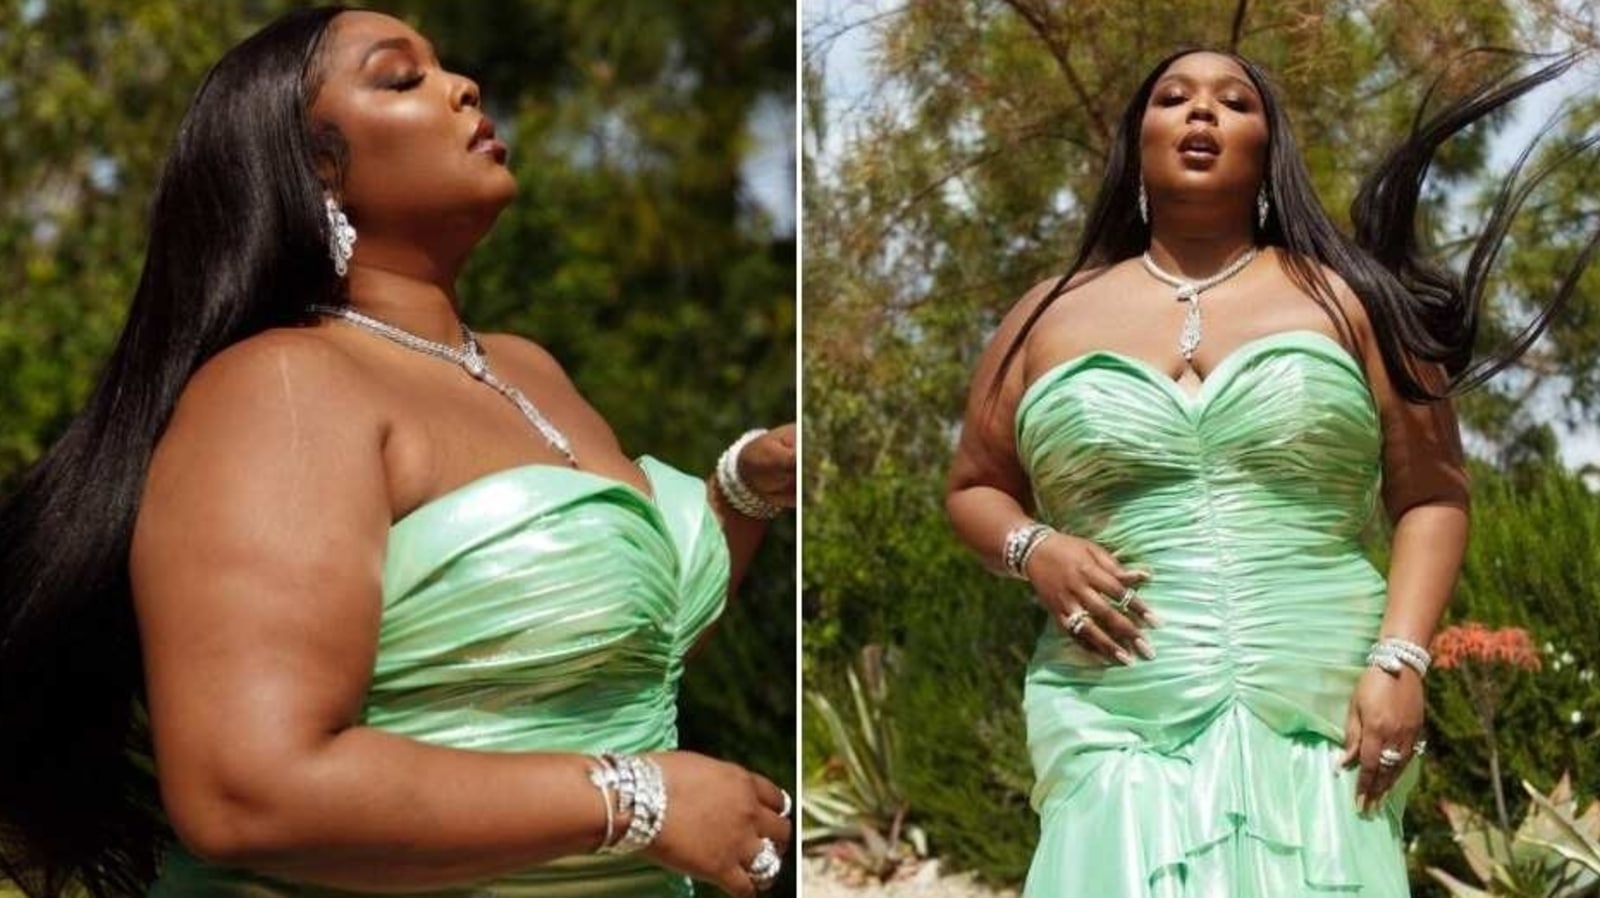 Grammys 2021: Lizzo is a stunner in strapless green dress and